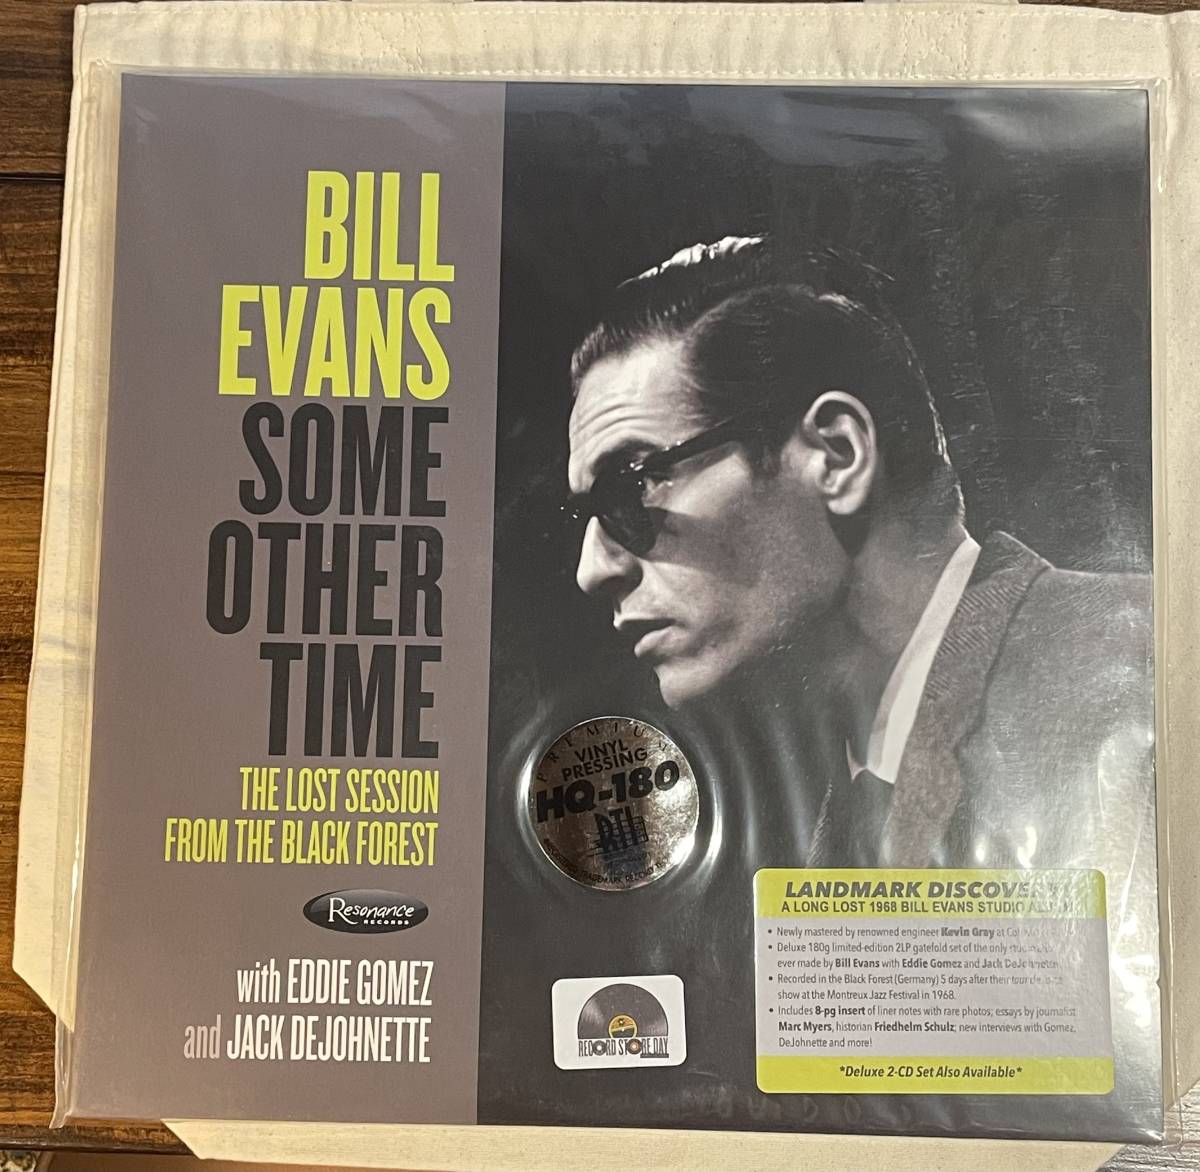 Bill Evans Some Other Time [12 inch Analog] 180g 重量盤の画像1